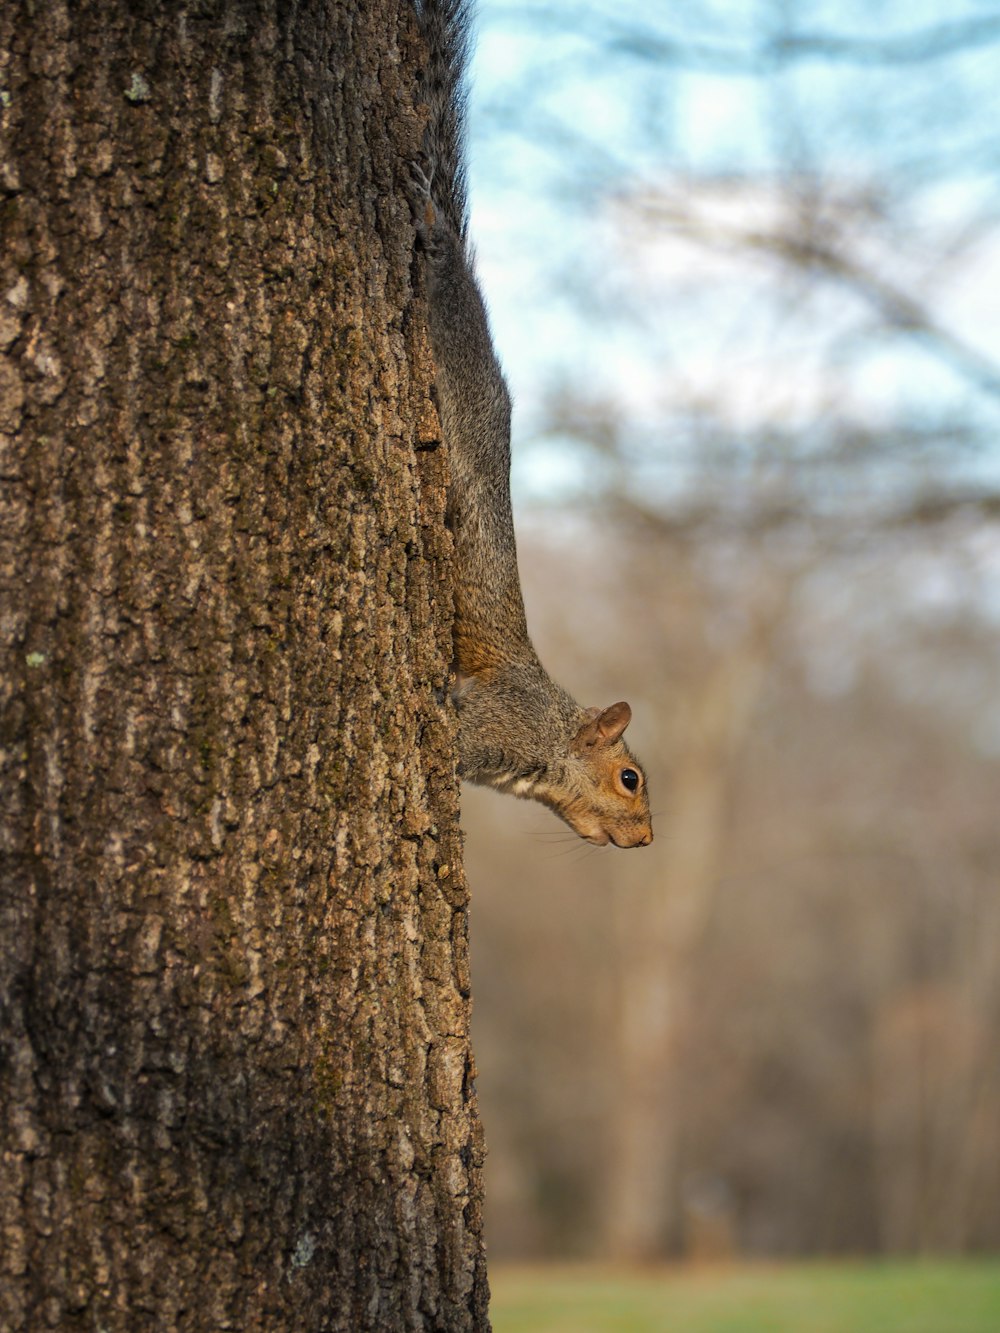 a squirrel is peeking out of the bark of a tree